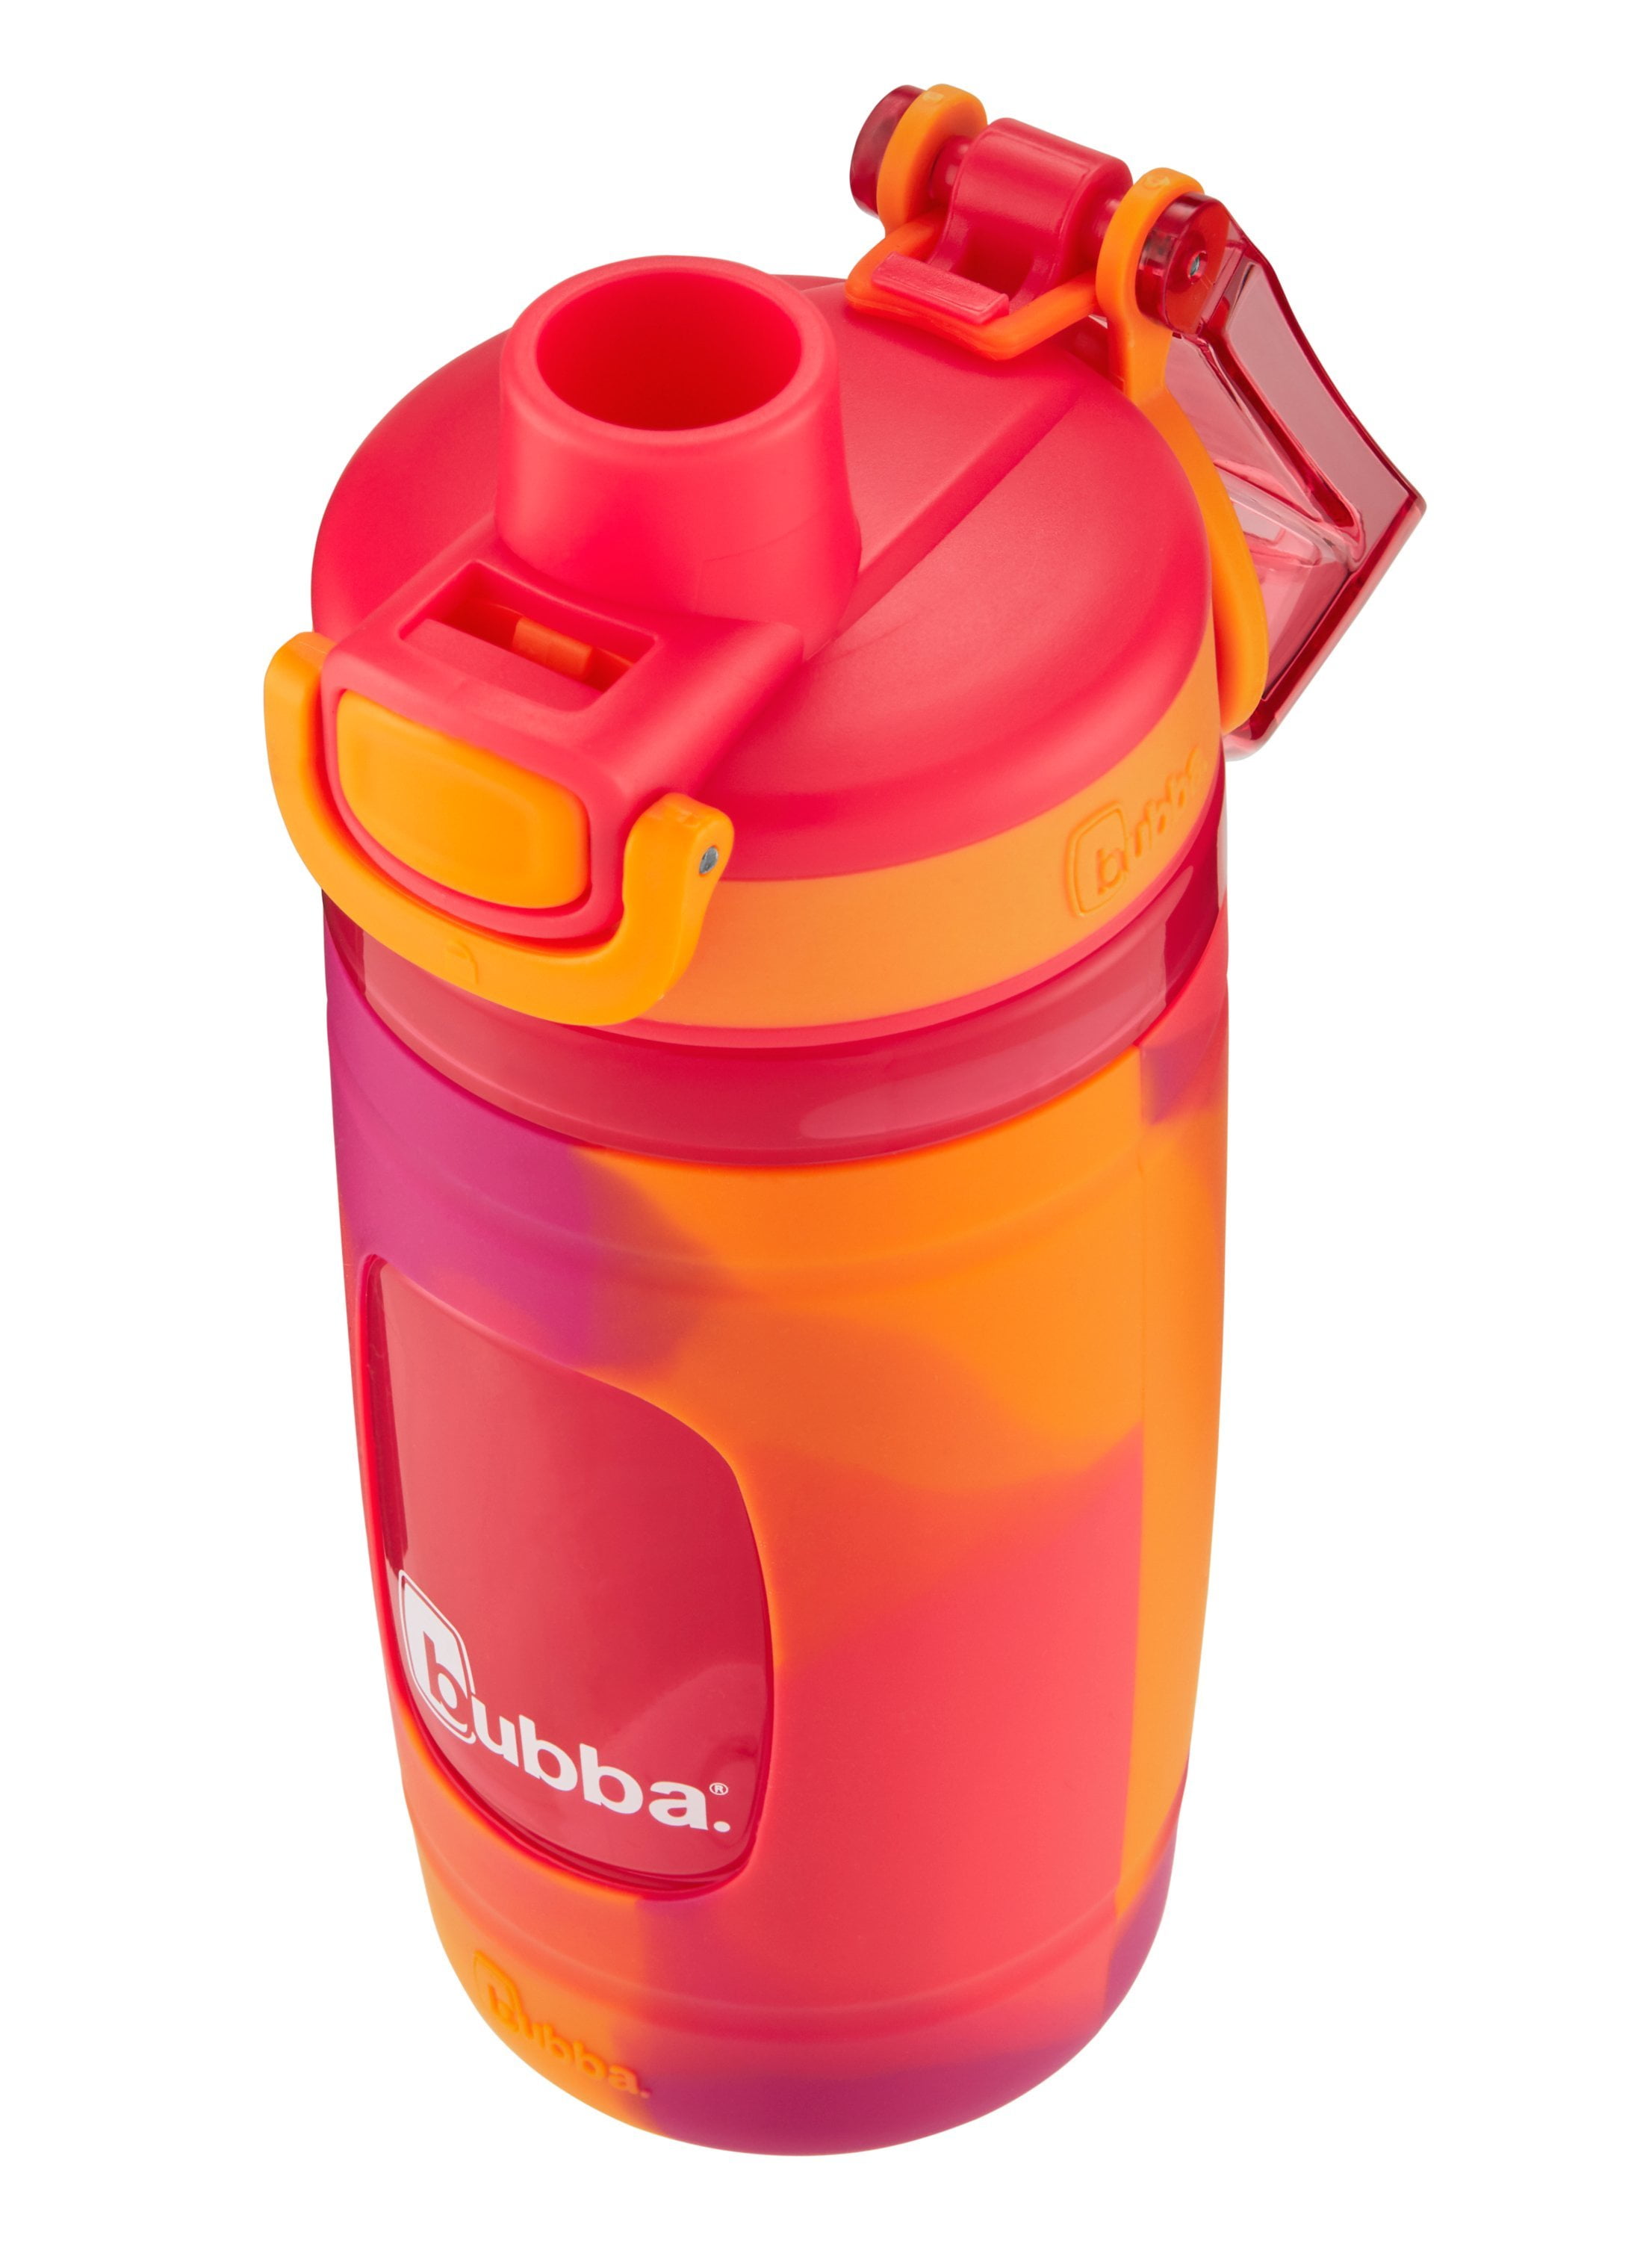 bubba Flo Kids Water Bottle with Silicone Sleeve, 16 oz, Mixed Berry